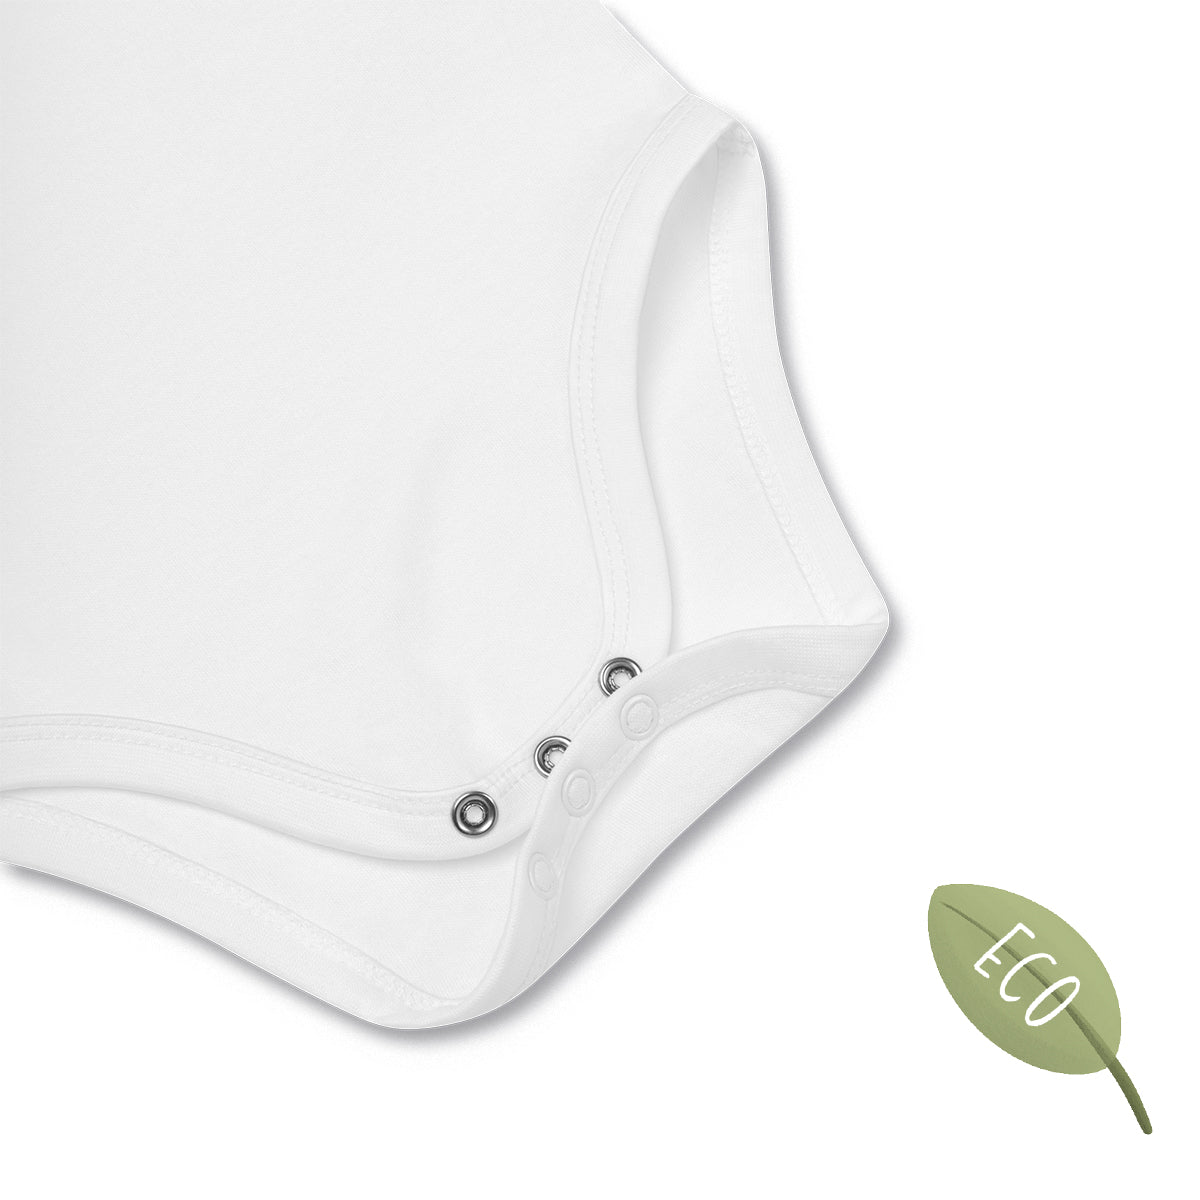 White Baby Bodysuit with a print of an illustration of a wire-haired Dachshund on a bike snap closure detail